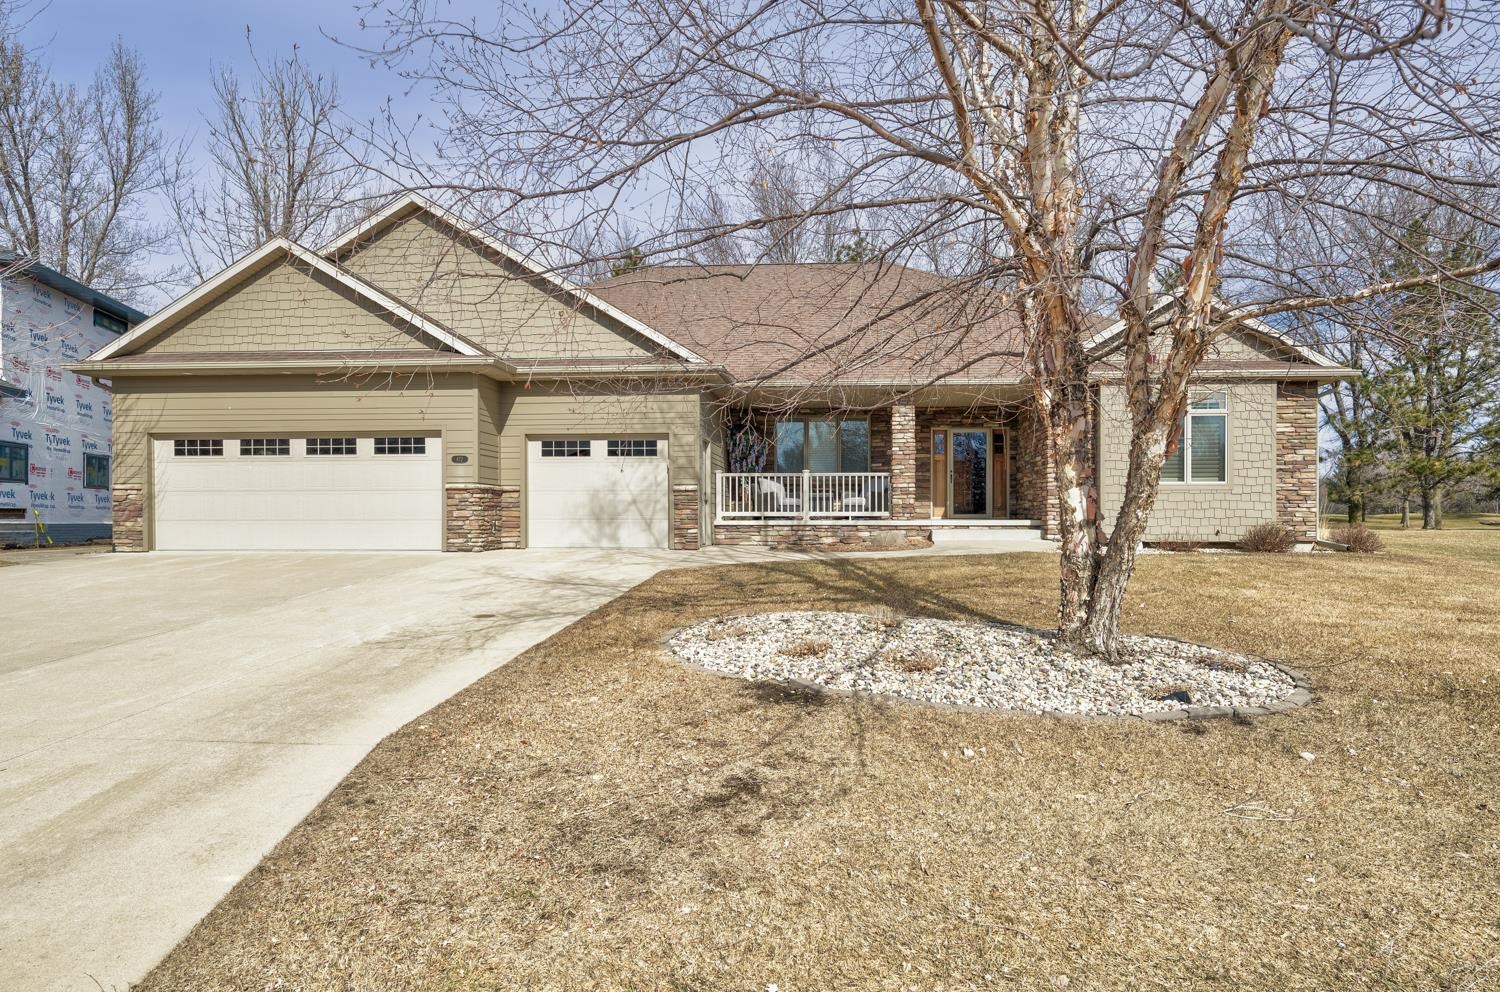 872 Emerald Pines Drive, Arnolds Park, IA 51331 